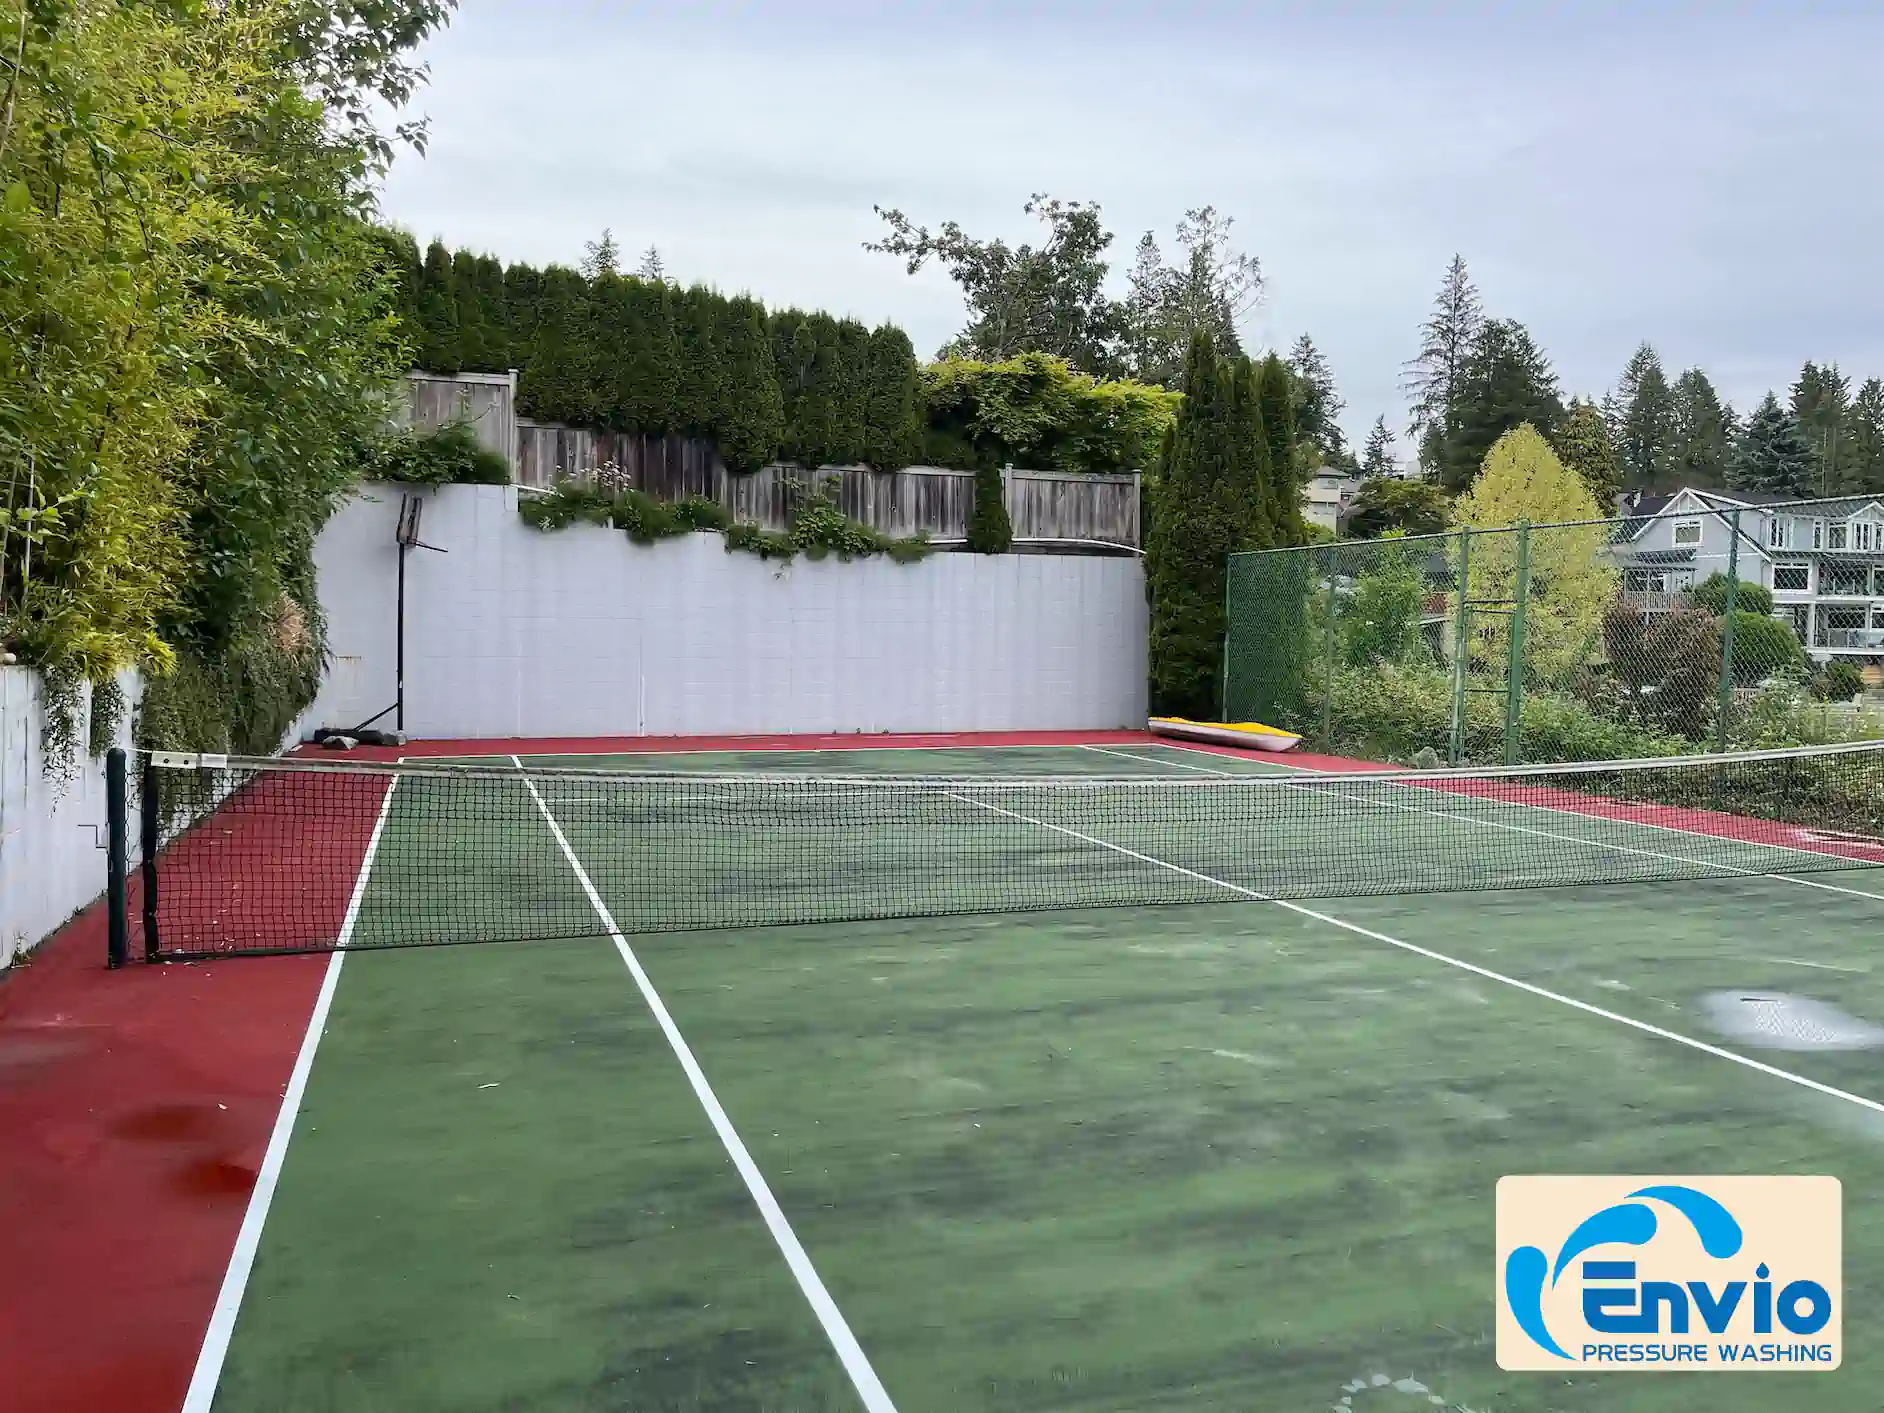 Tennis court after cleaning